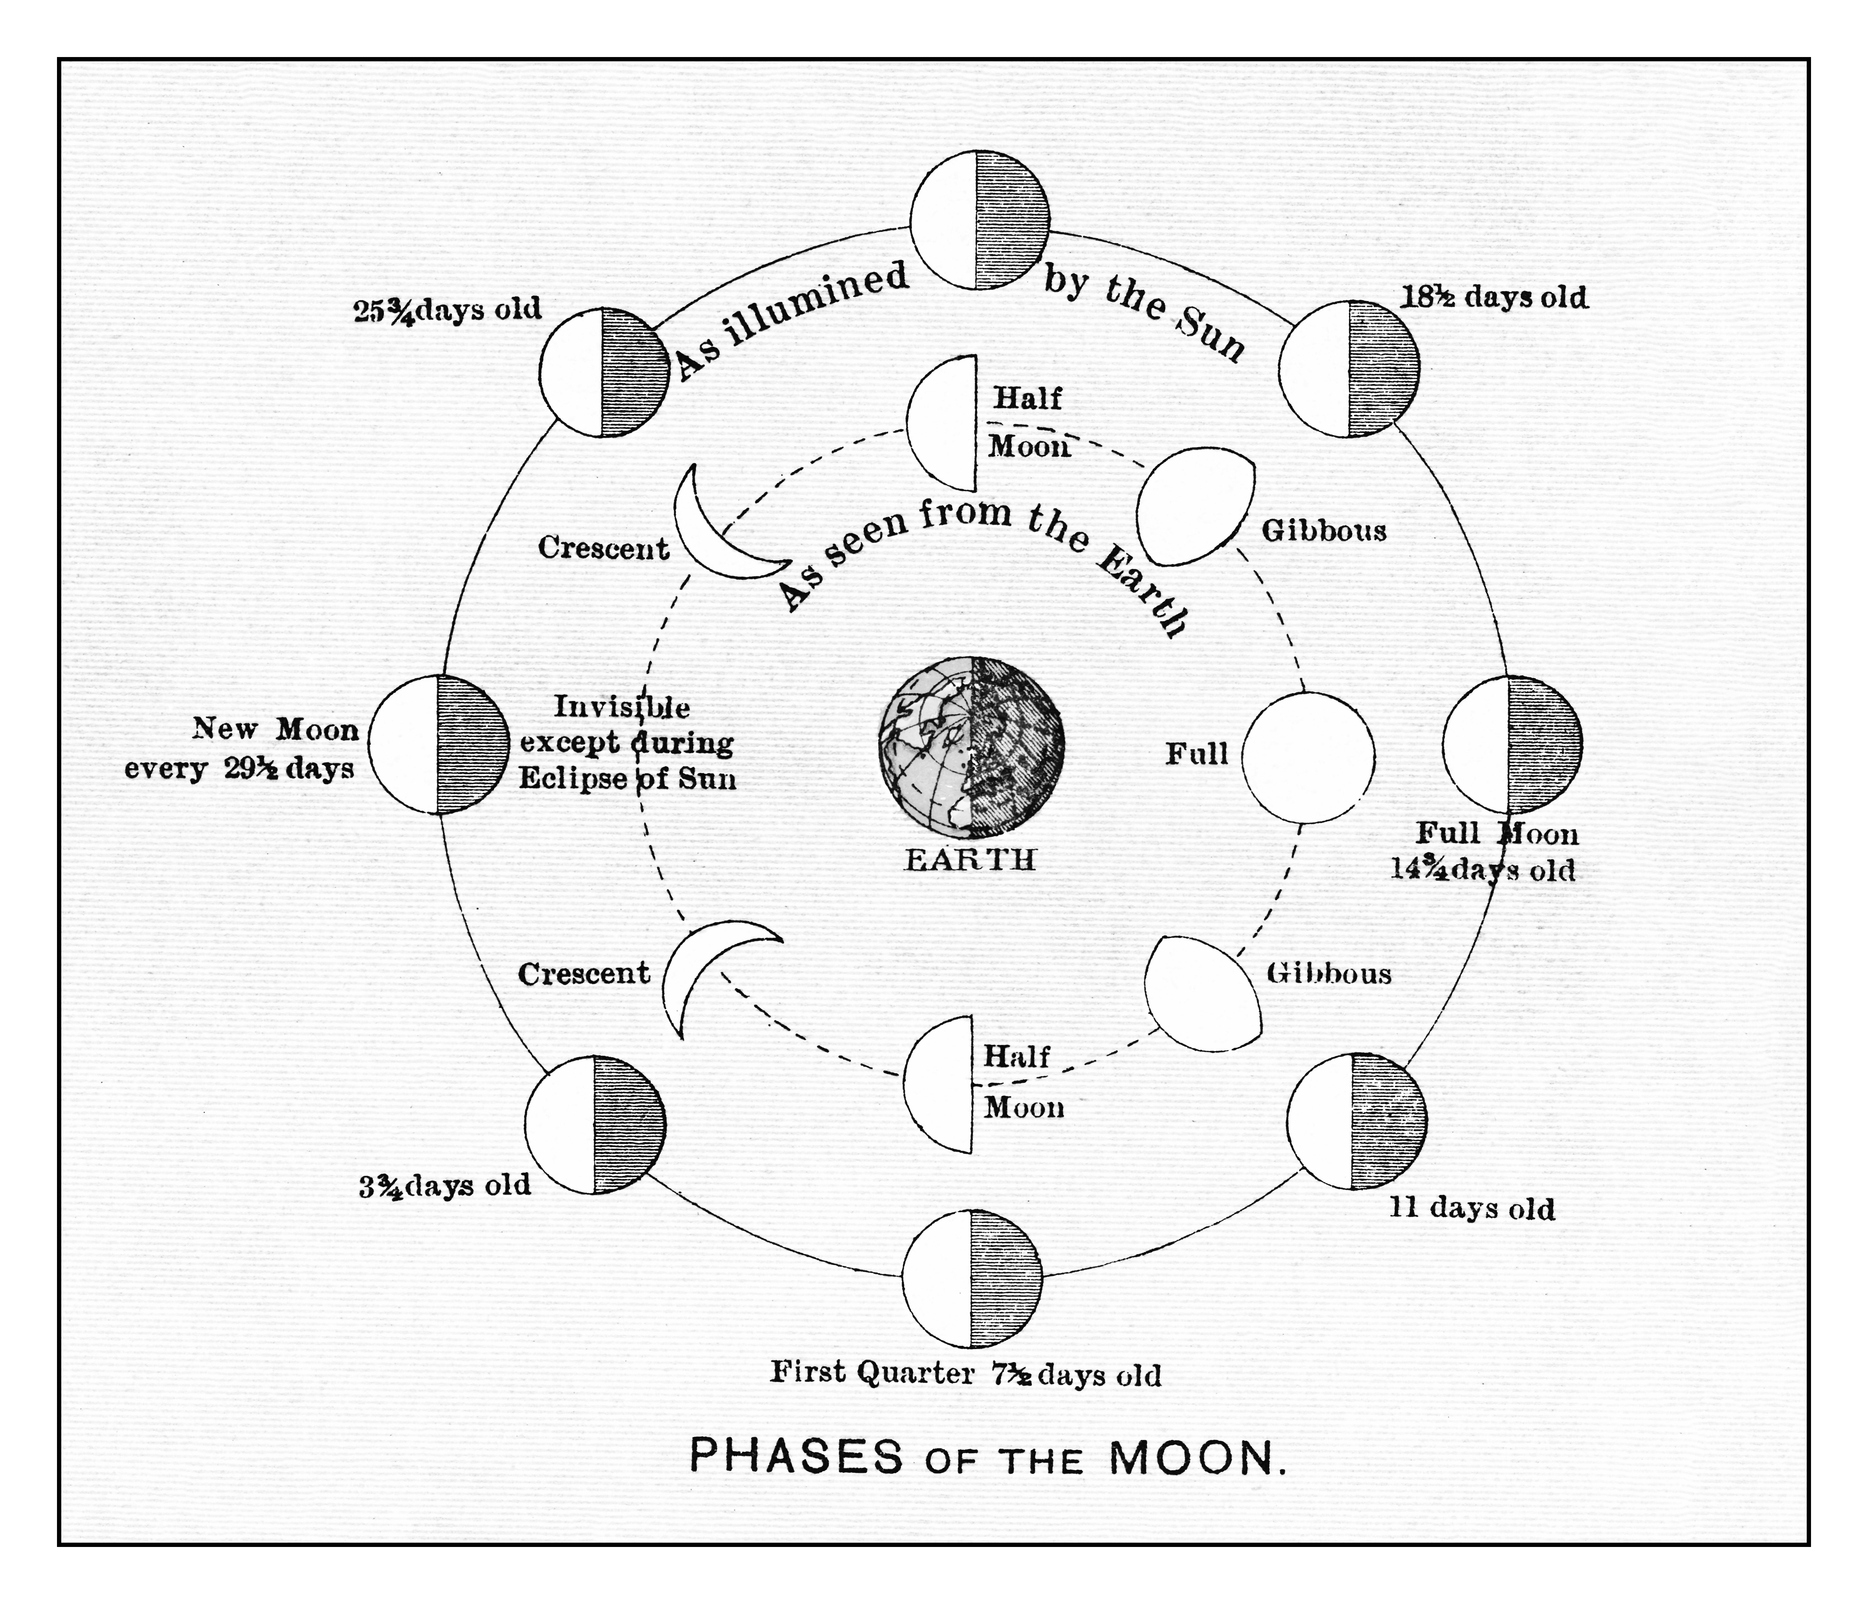 Diagram showing phases of the Moon with labels for each phase and days it takes to transition. Earth is at the center